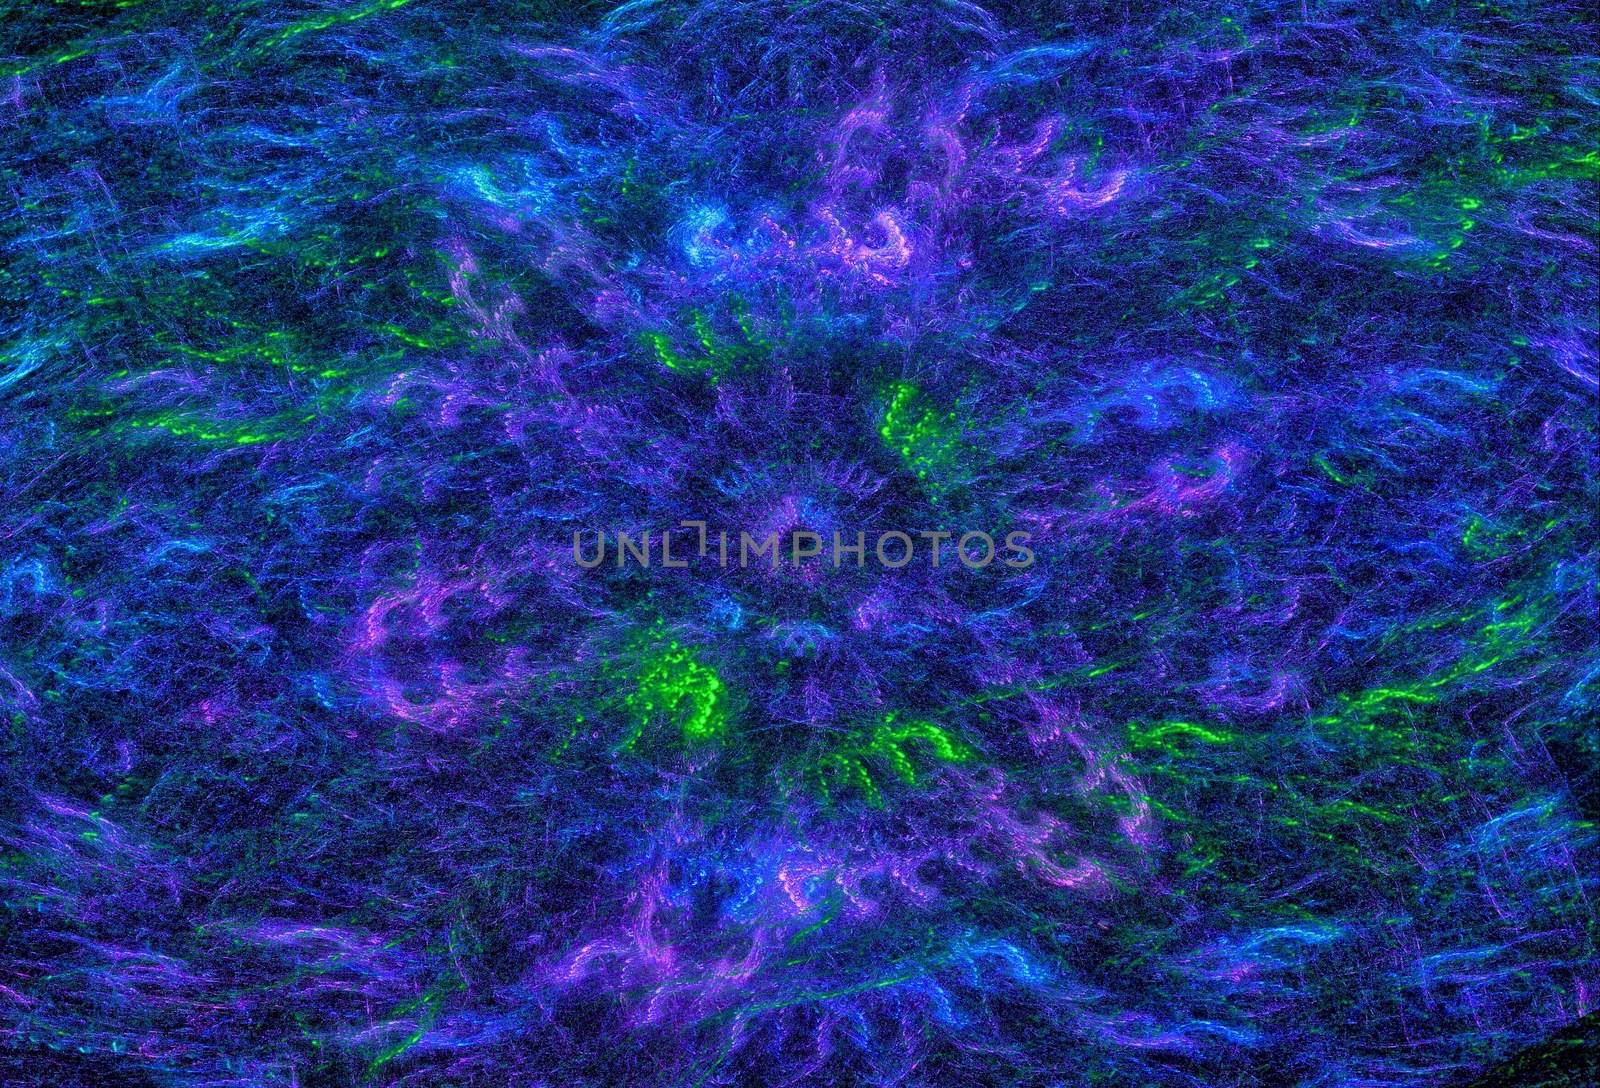 Digital Art: Fractal Graphics: The Chaos Sea of Binary Stars. Fantastic Wallpaper / Background / Scene Design. Sci-Fi / Abstract Style. by NextMars